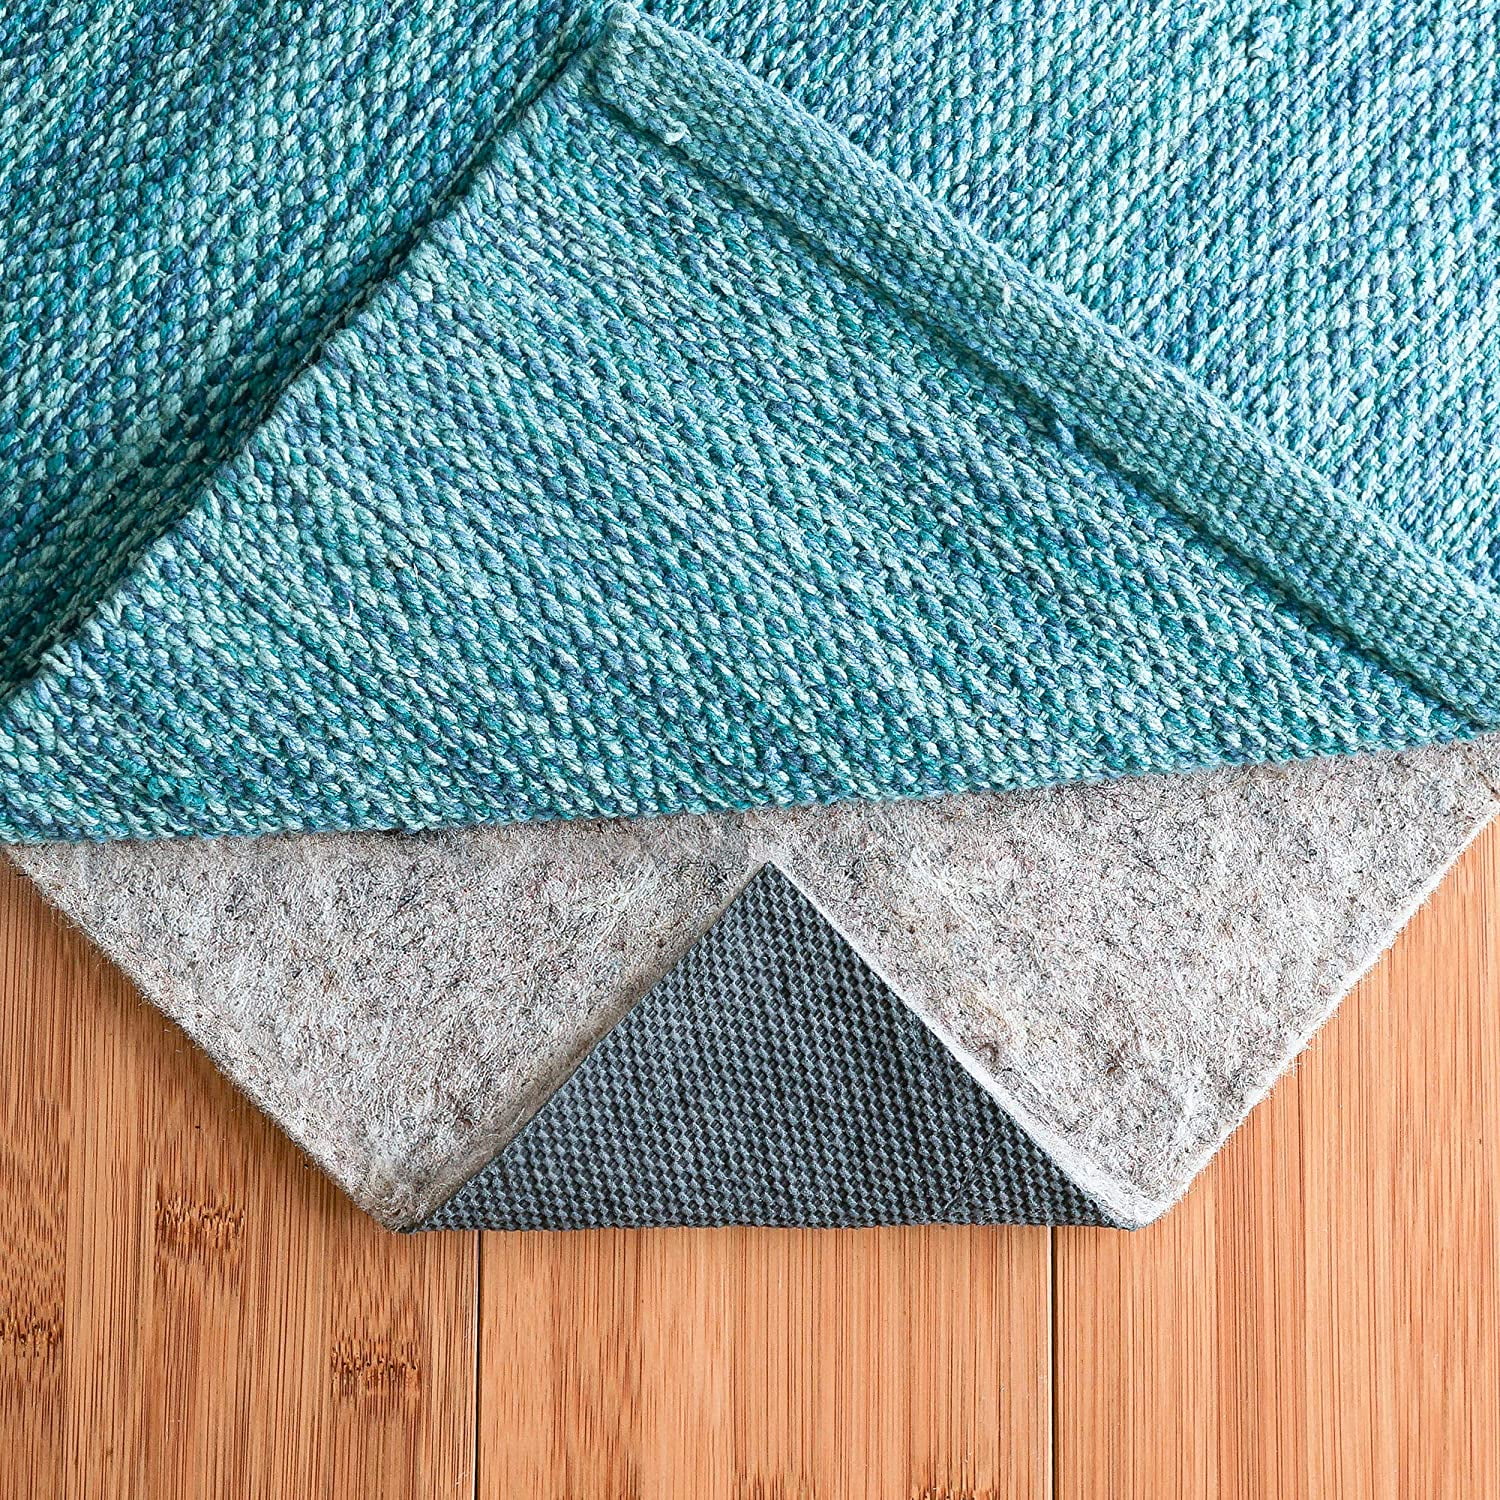 RugPadUSA - Basics - 7'6 inch x 9'6 inch - 1/2 inch Thick - 100% Felt - Protective Cushioning Rug Pad - Safe for All Floors and Finishes Including